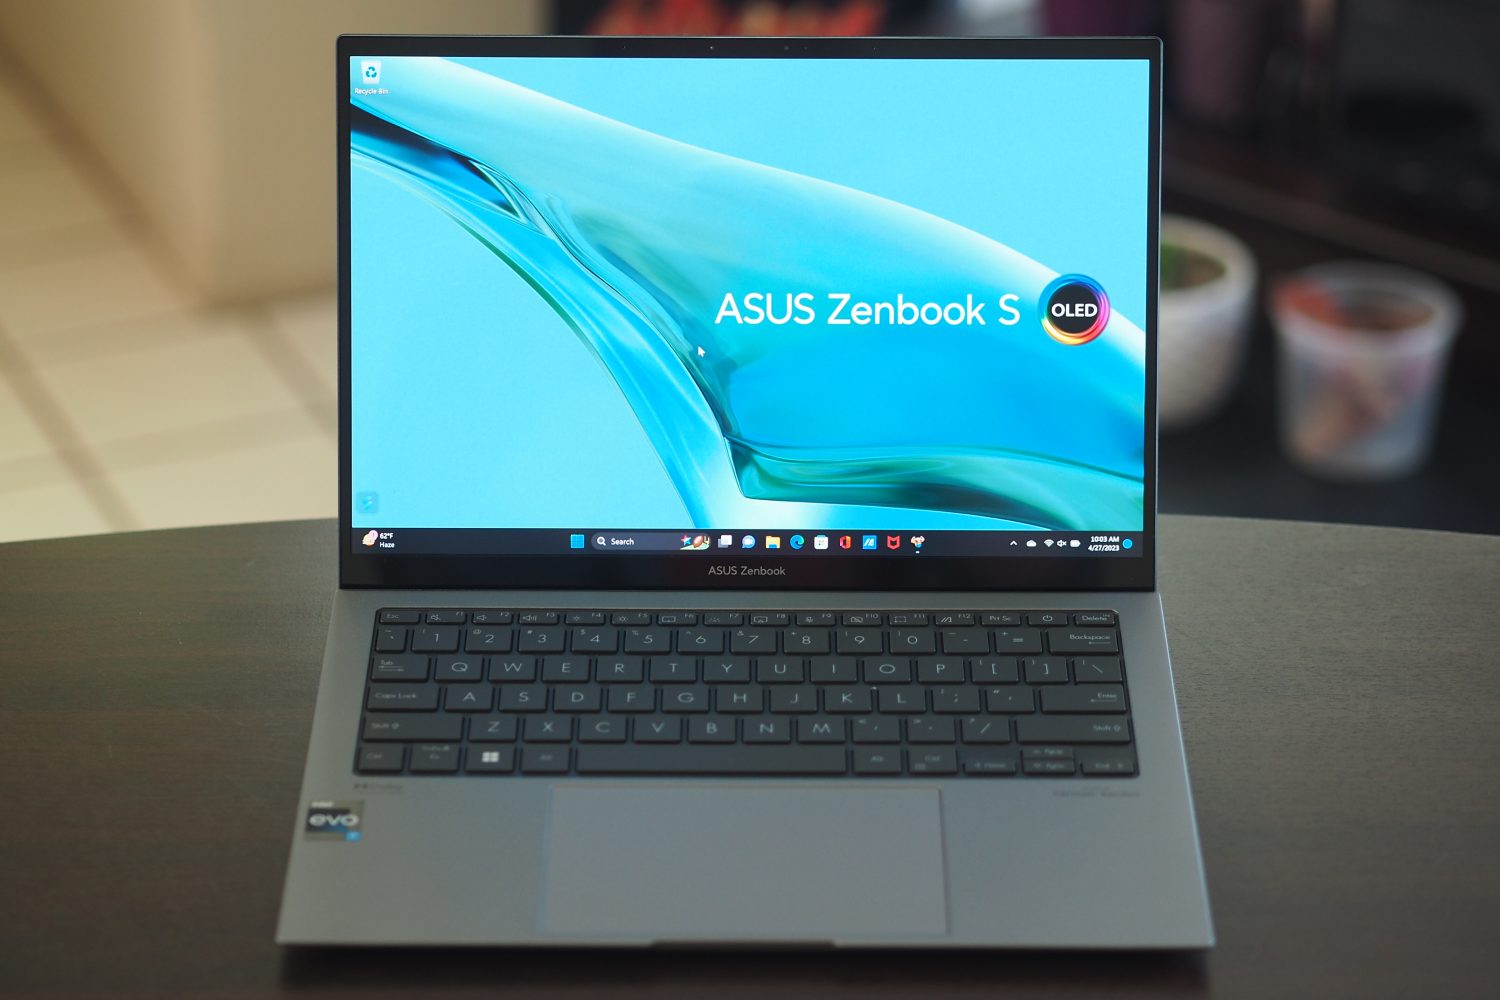 Asus Zenbook S13 OLED Review - Pros and cons, Verdict